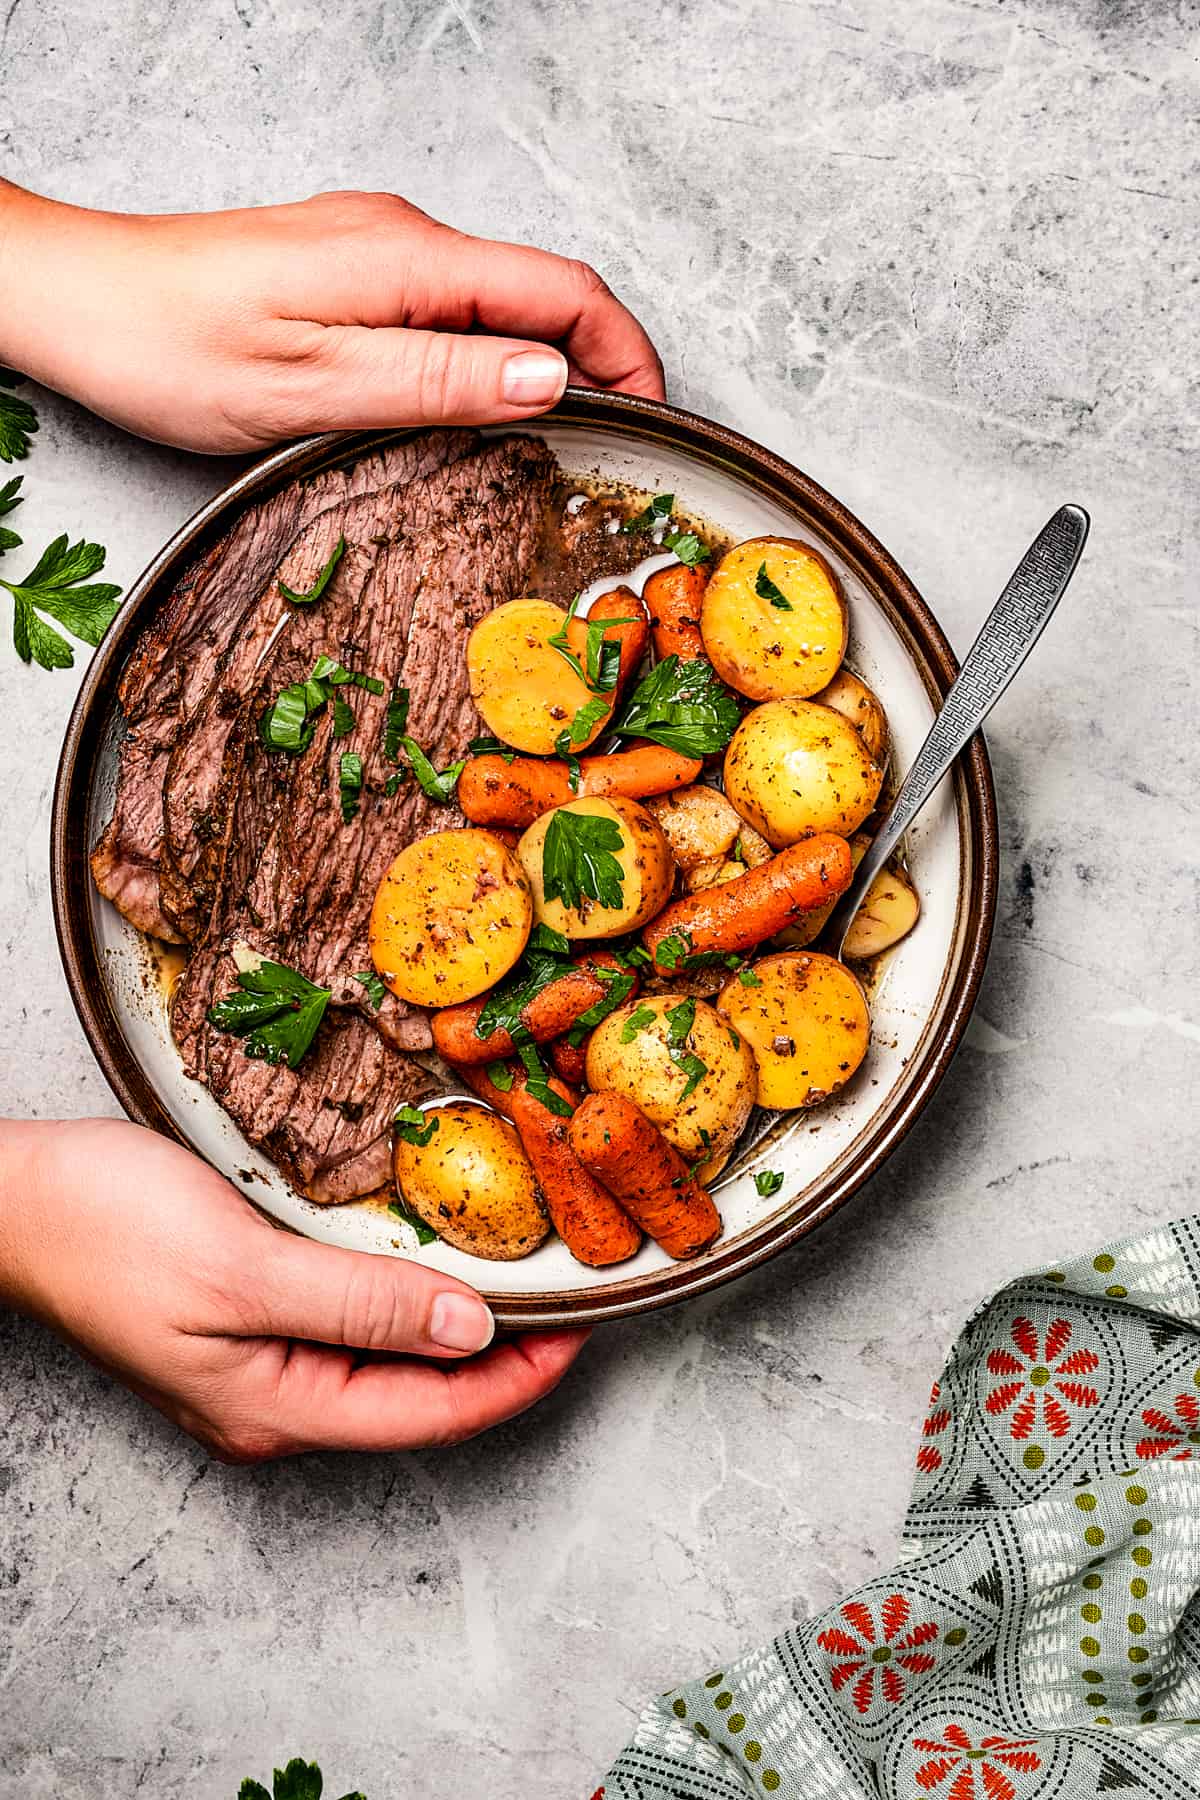 Hands picking up a dinner plate with a helping of slow cooker balsamic pot roast, potatoes, and carrots.